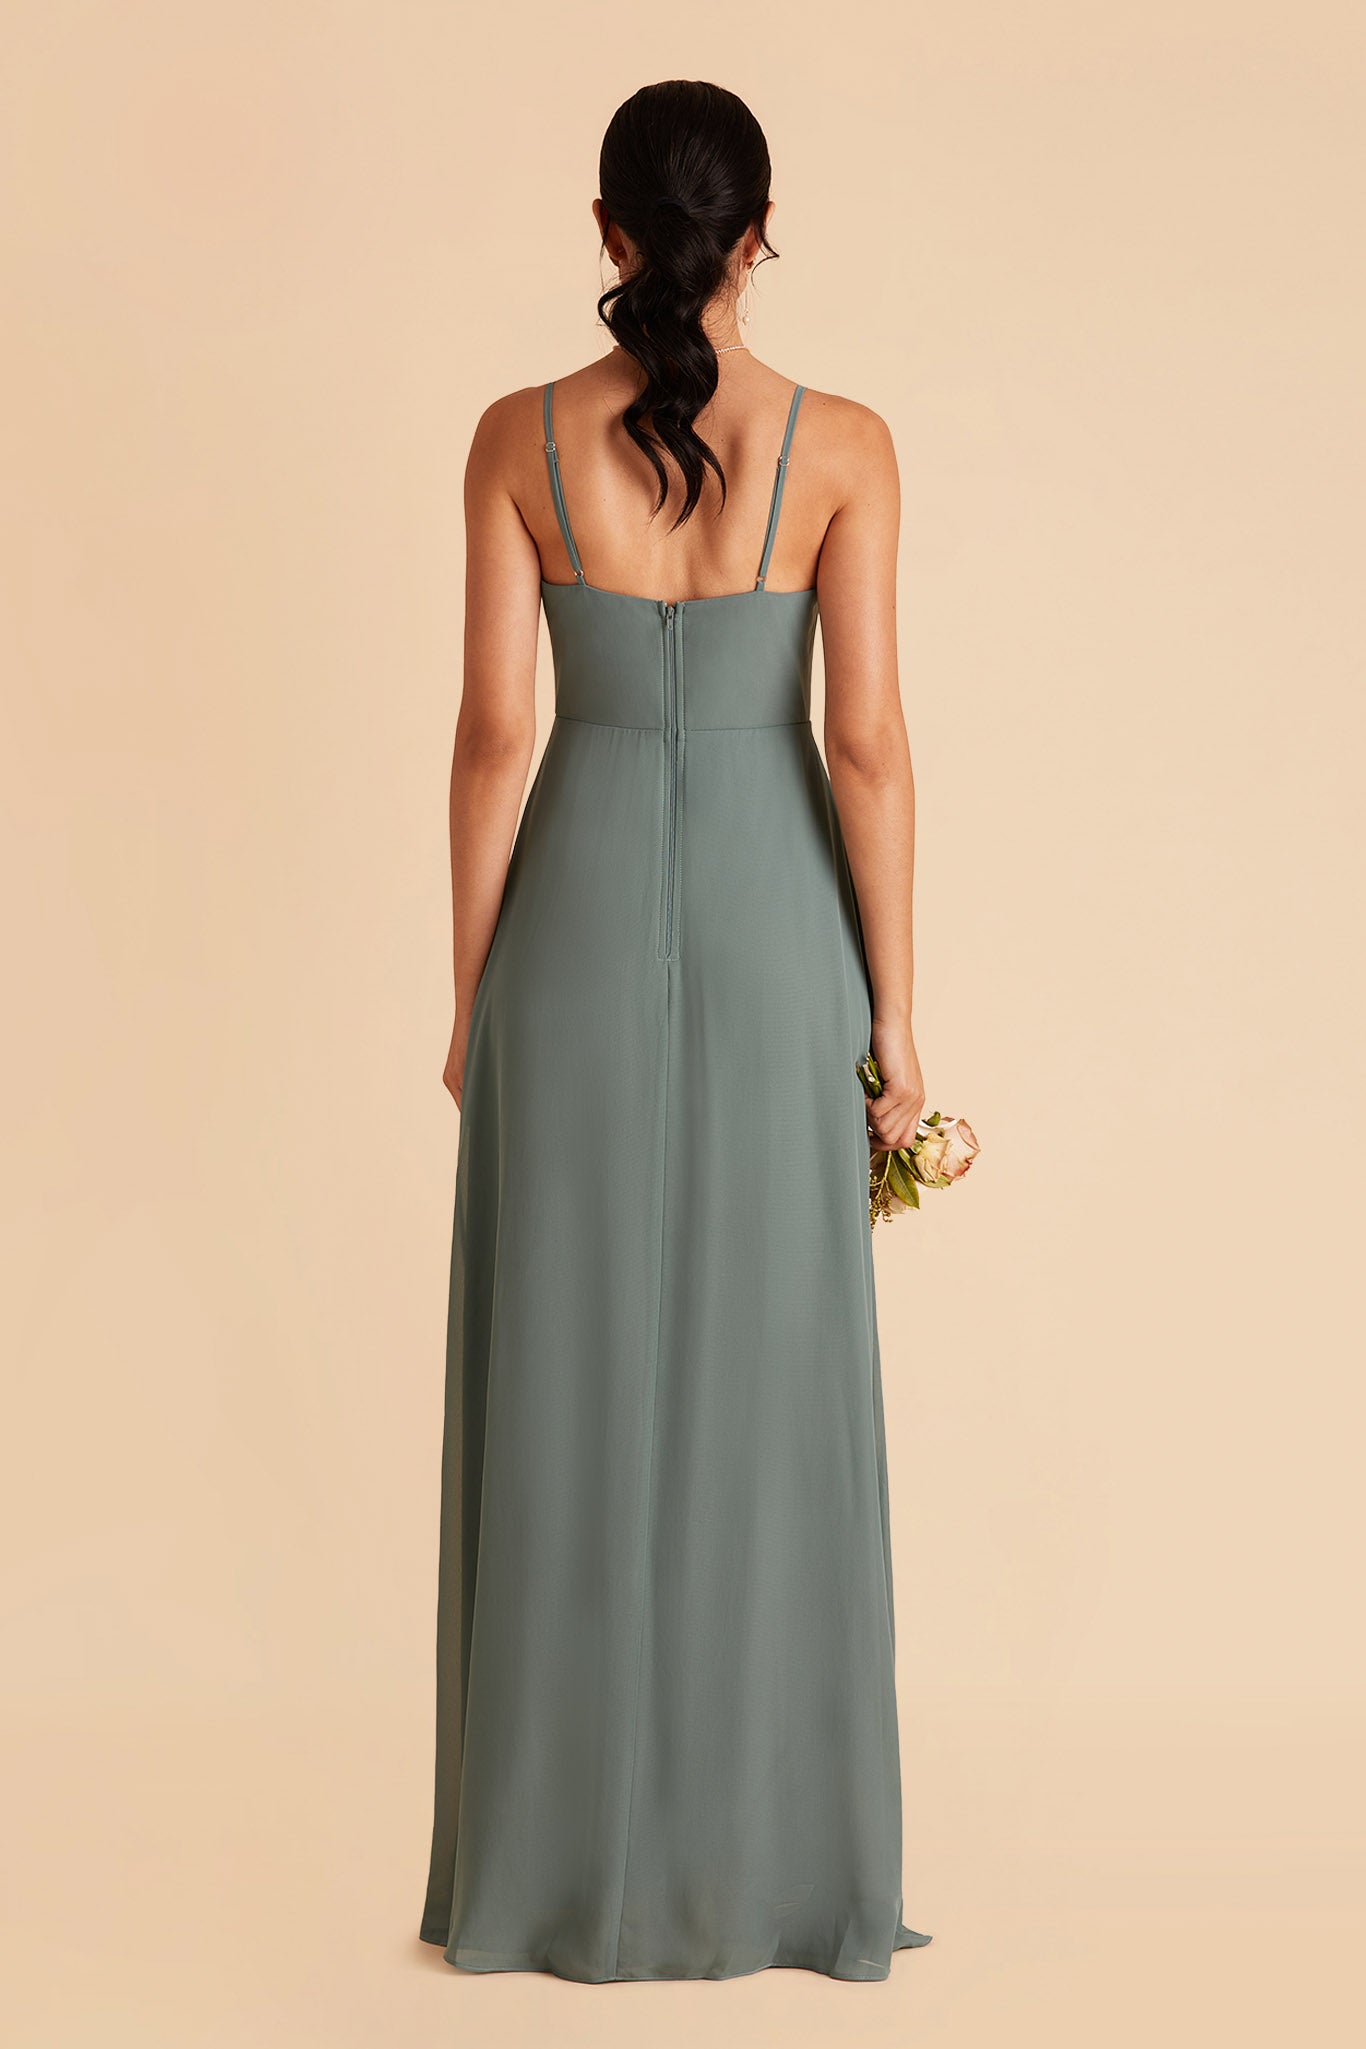 Amy bridesmaid dress with slit in sea glass chiffon by Birdy Grey, back view